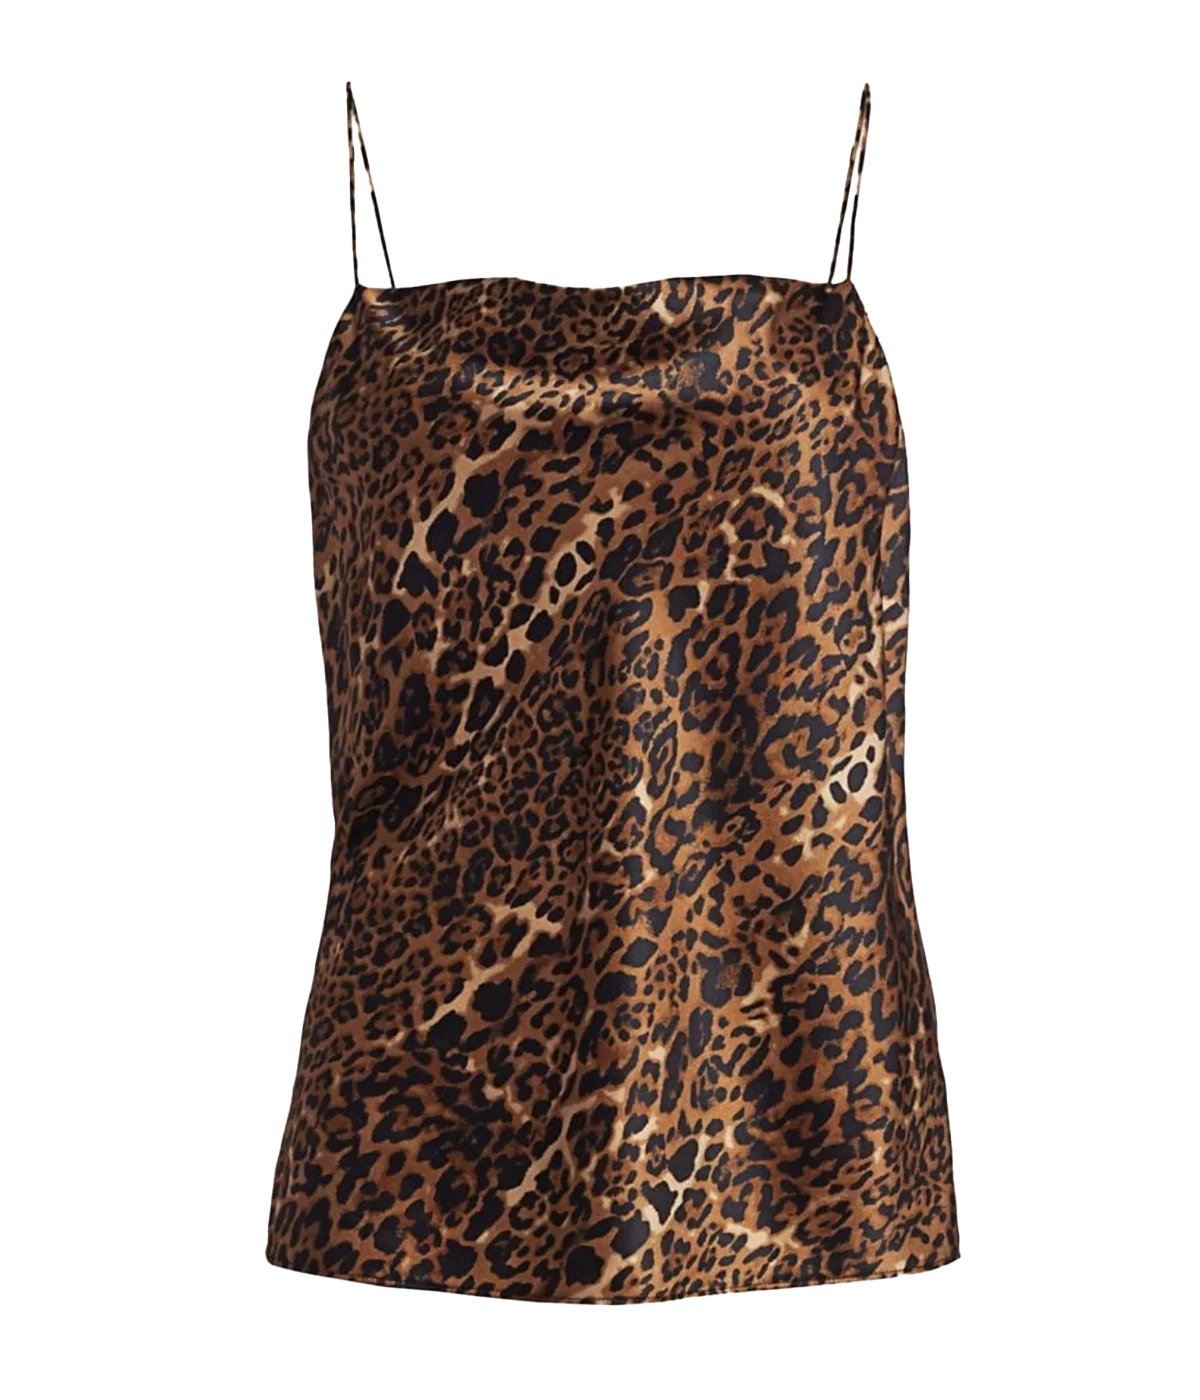 A stand out leopard print 100% silk camisole, cut on the bias, delicate strap and cowl neck. Made internationally, comfortable, bra friendly, 100% silk, adjustable straps, long lunch, trendy. 